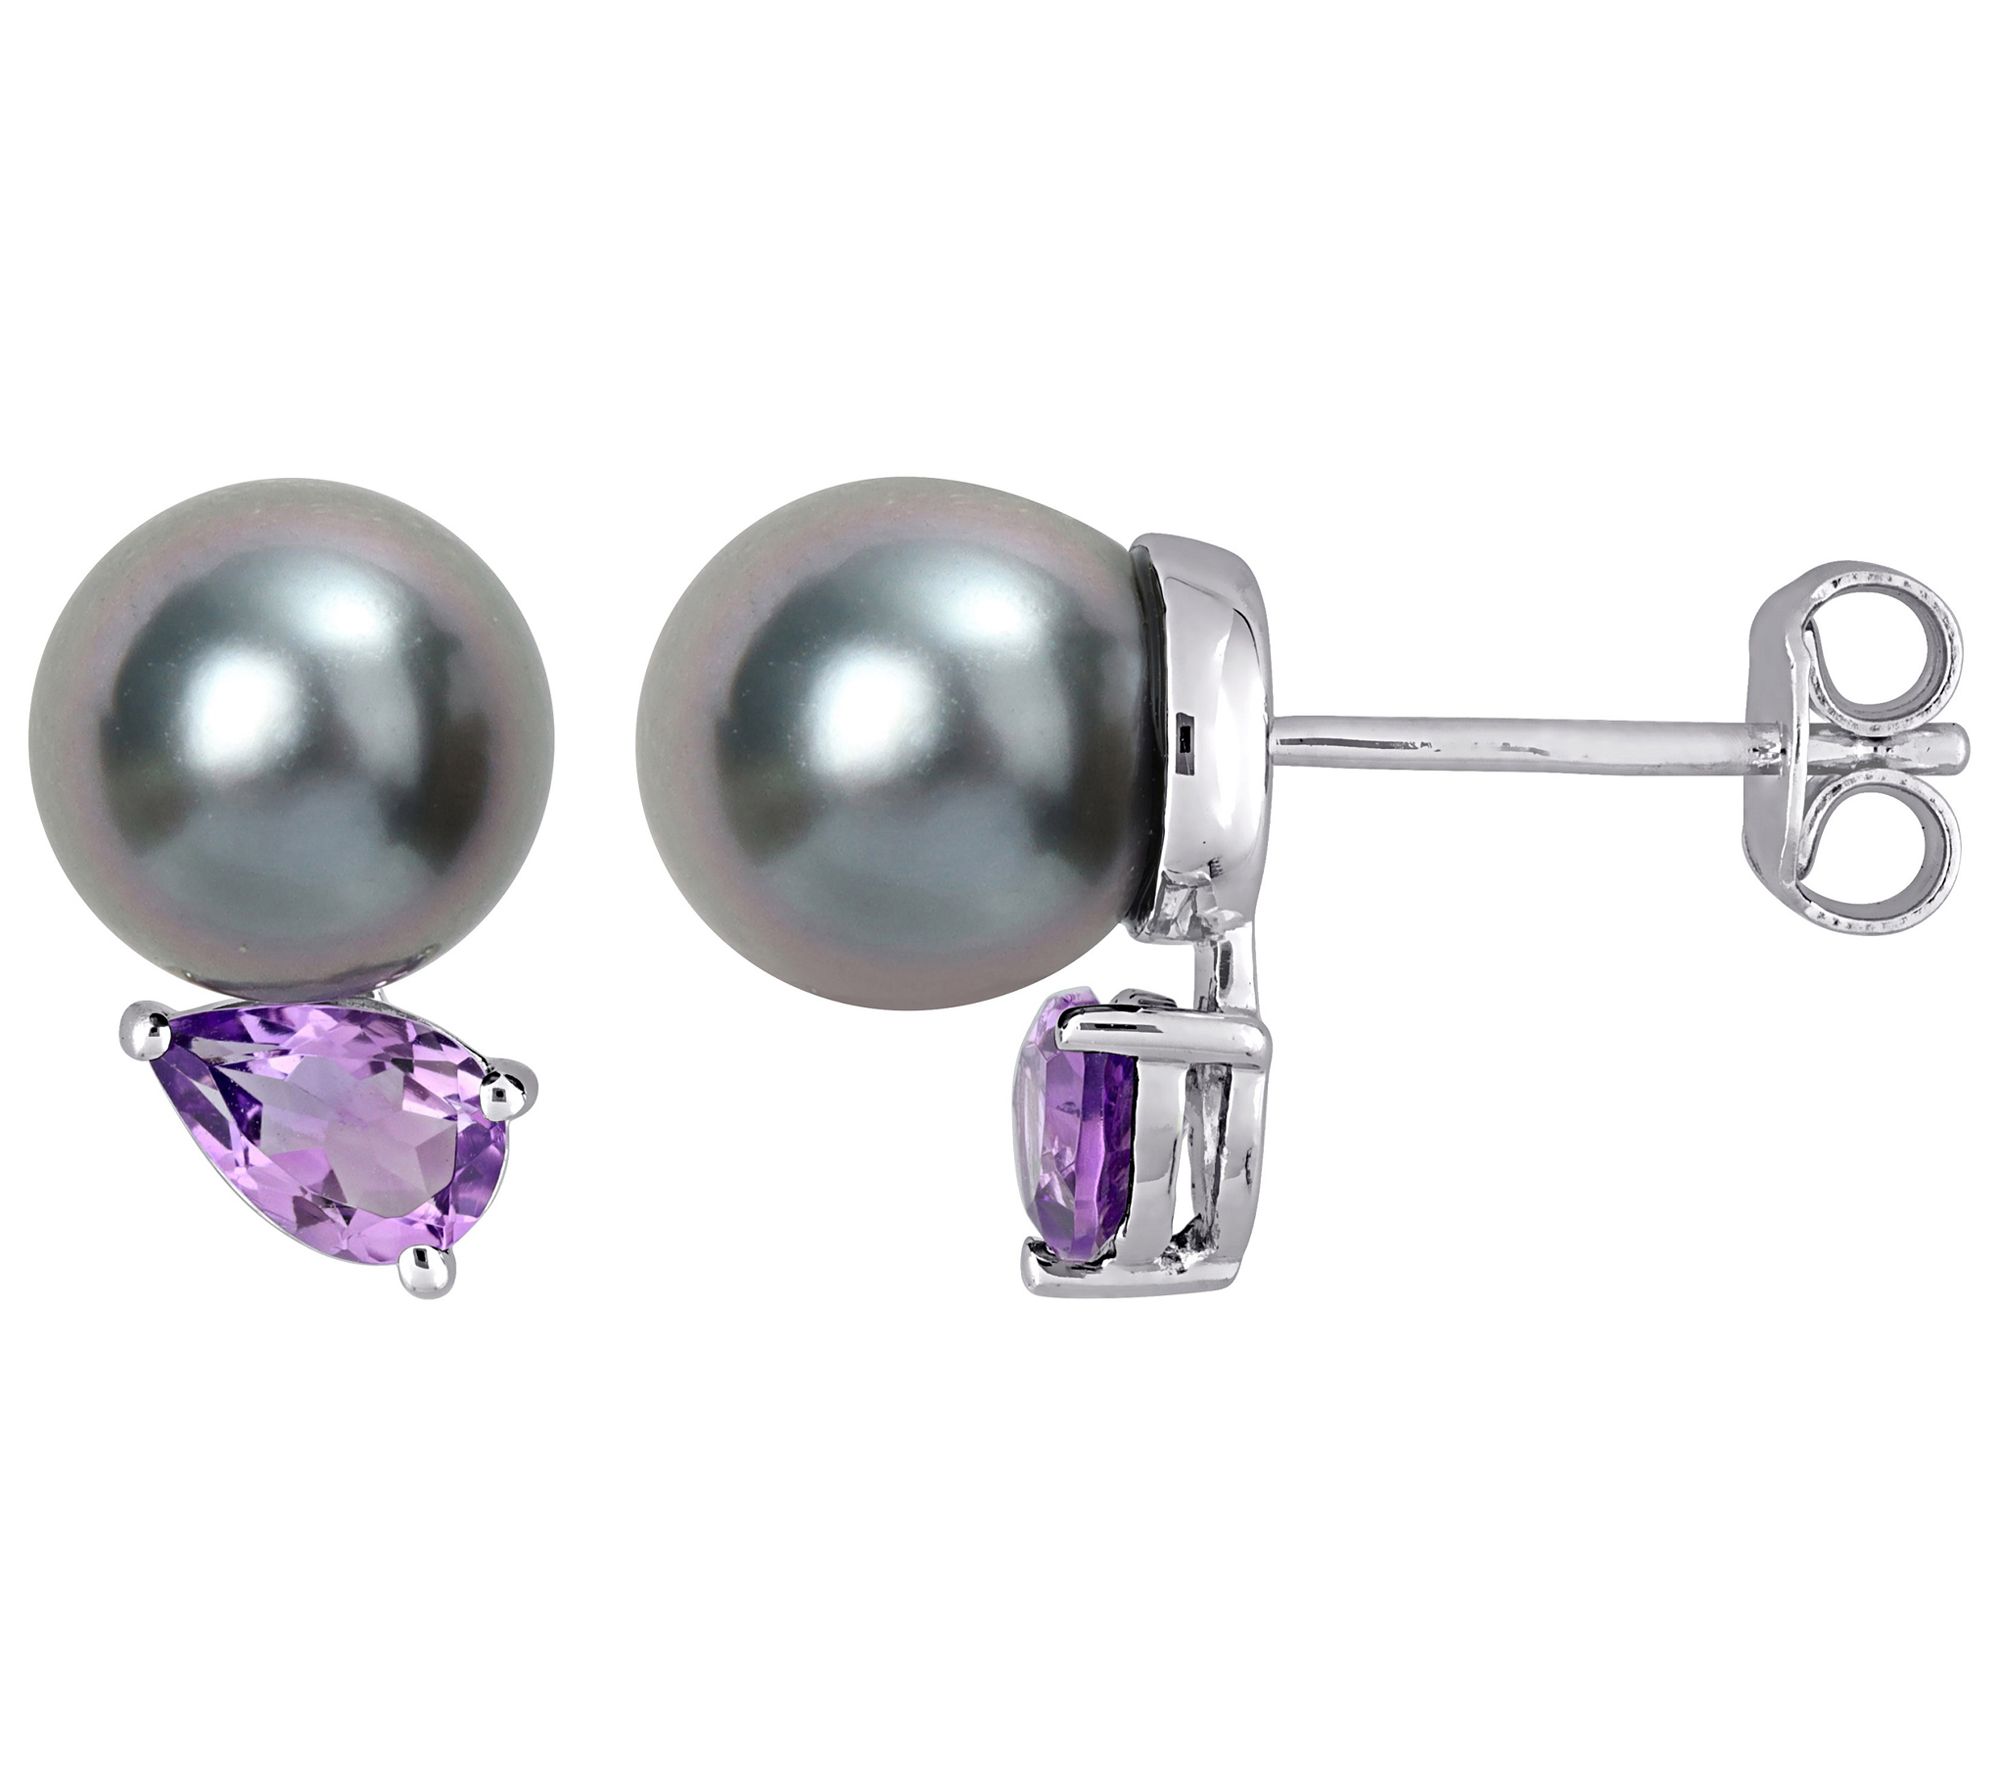 Top quality natural Amethyst stone 10 mm ball sterling silver leverback earrings 